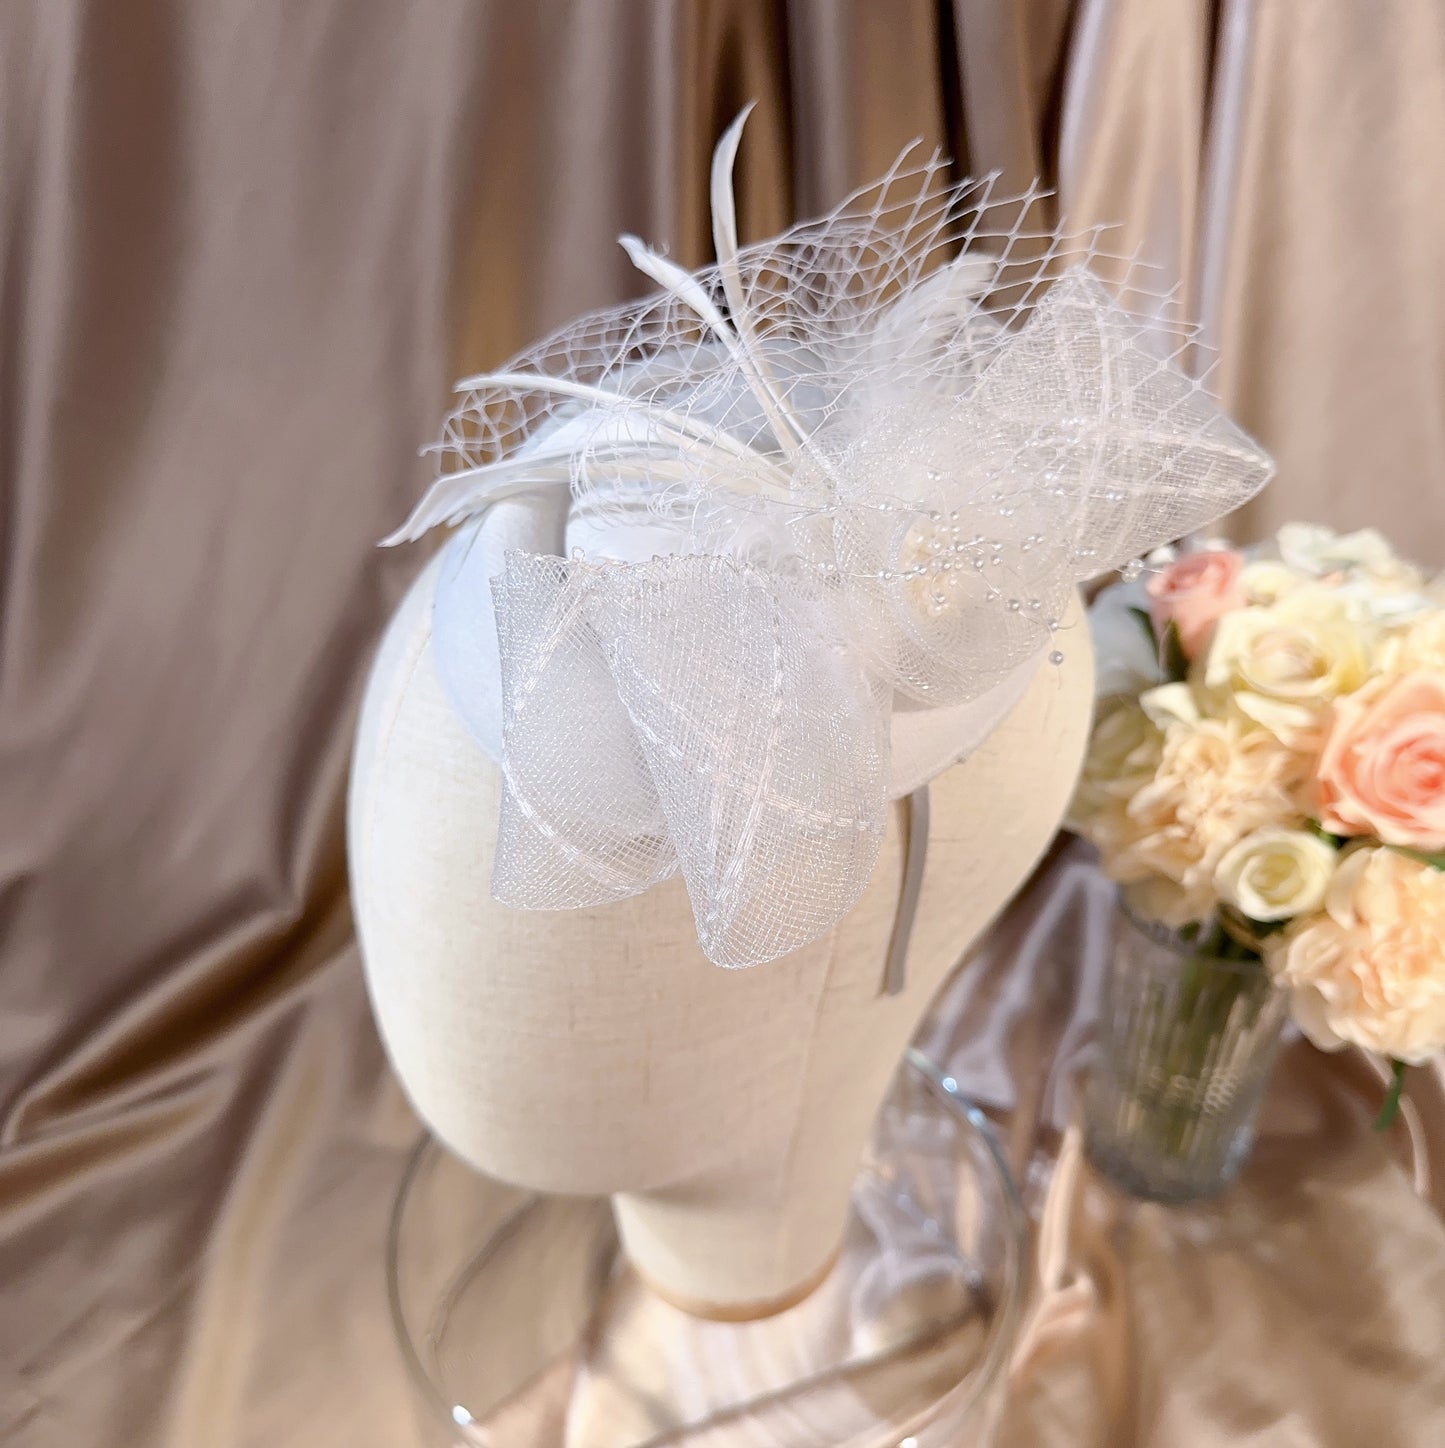 039480018 Bridal Hats for Wedding/Tea Party Hats Fascinators Millinary with Veil (Available Black )